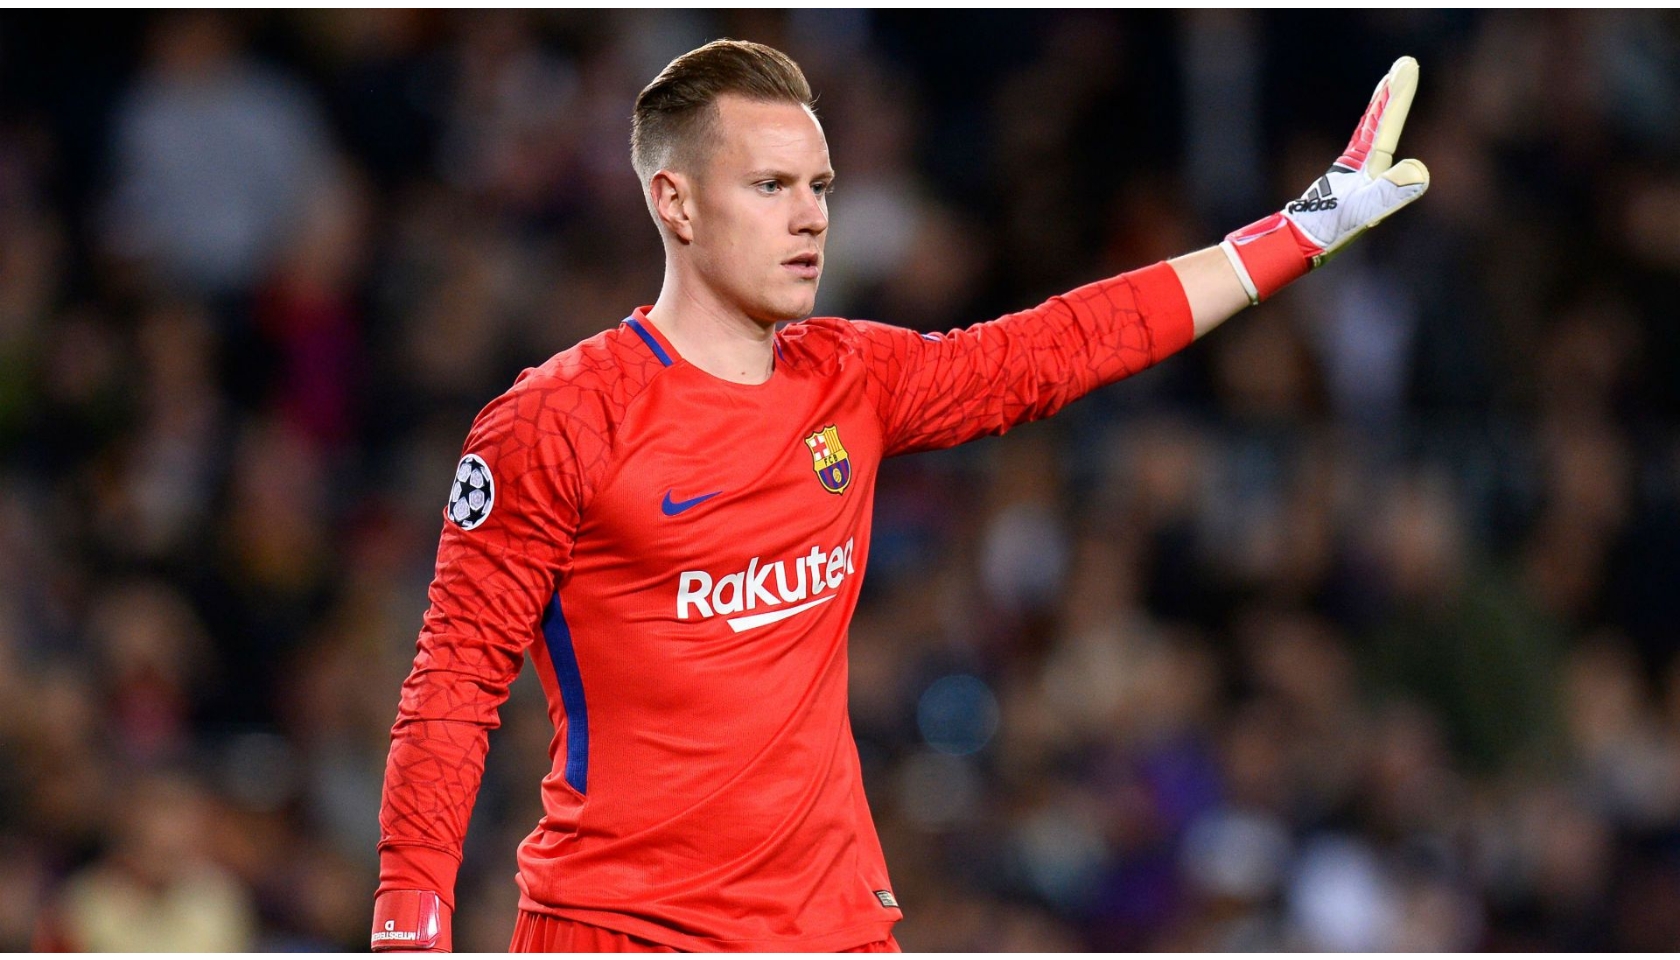 Museum reign to add Marc-André Ter Stegen's Match-Issued Adidas Gloves - CharityStars